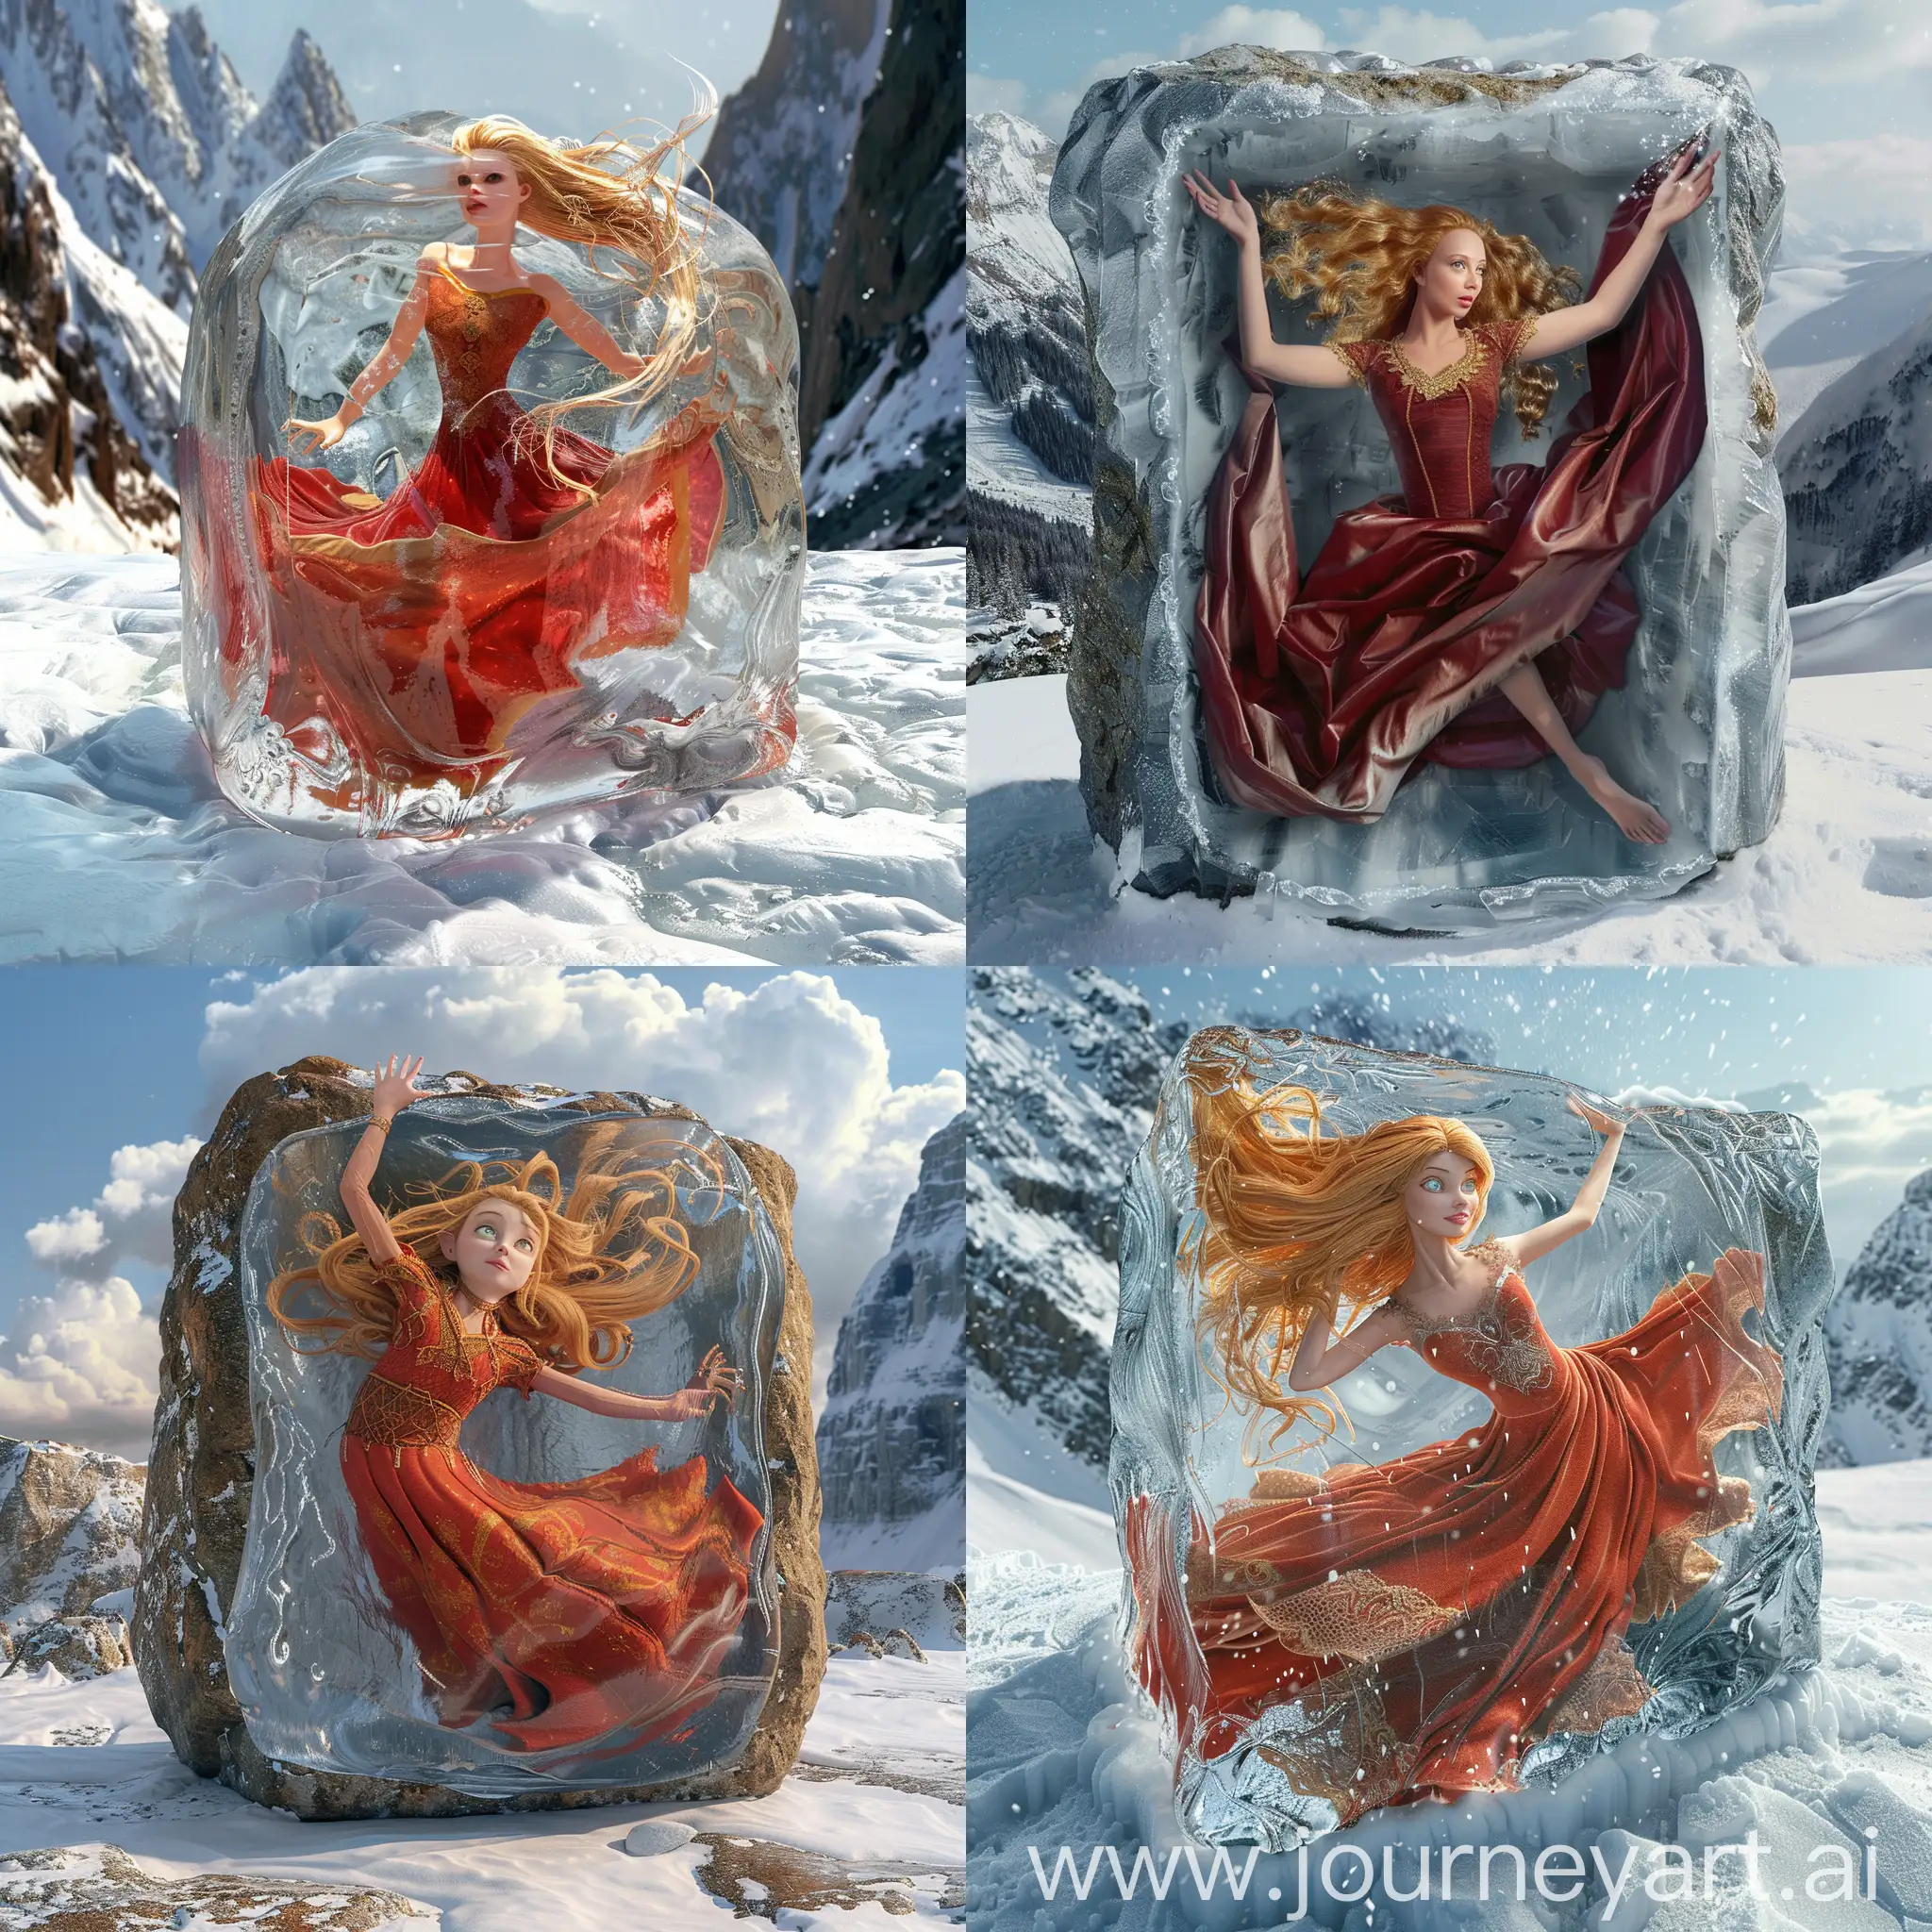 Stunning 3d photographic image of a large block of ice on a snowy mountain. Inside is a beautiful medieval queen. The whole of her head, body, legs and arms are unable to escape. She has beautiful eyes, long golden hair and a long flowing red medieval dress. She is trapped and her dress and her hair are floating in the ice. her arms are raised up and her legs are raised like she is dancing. 